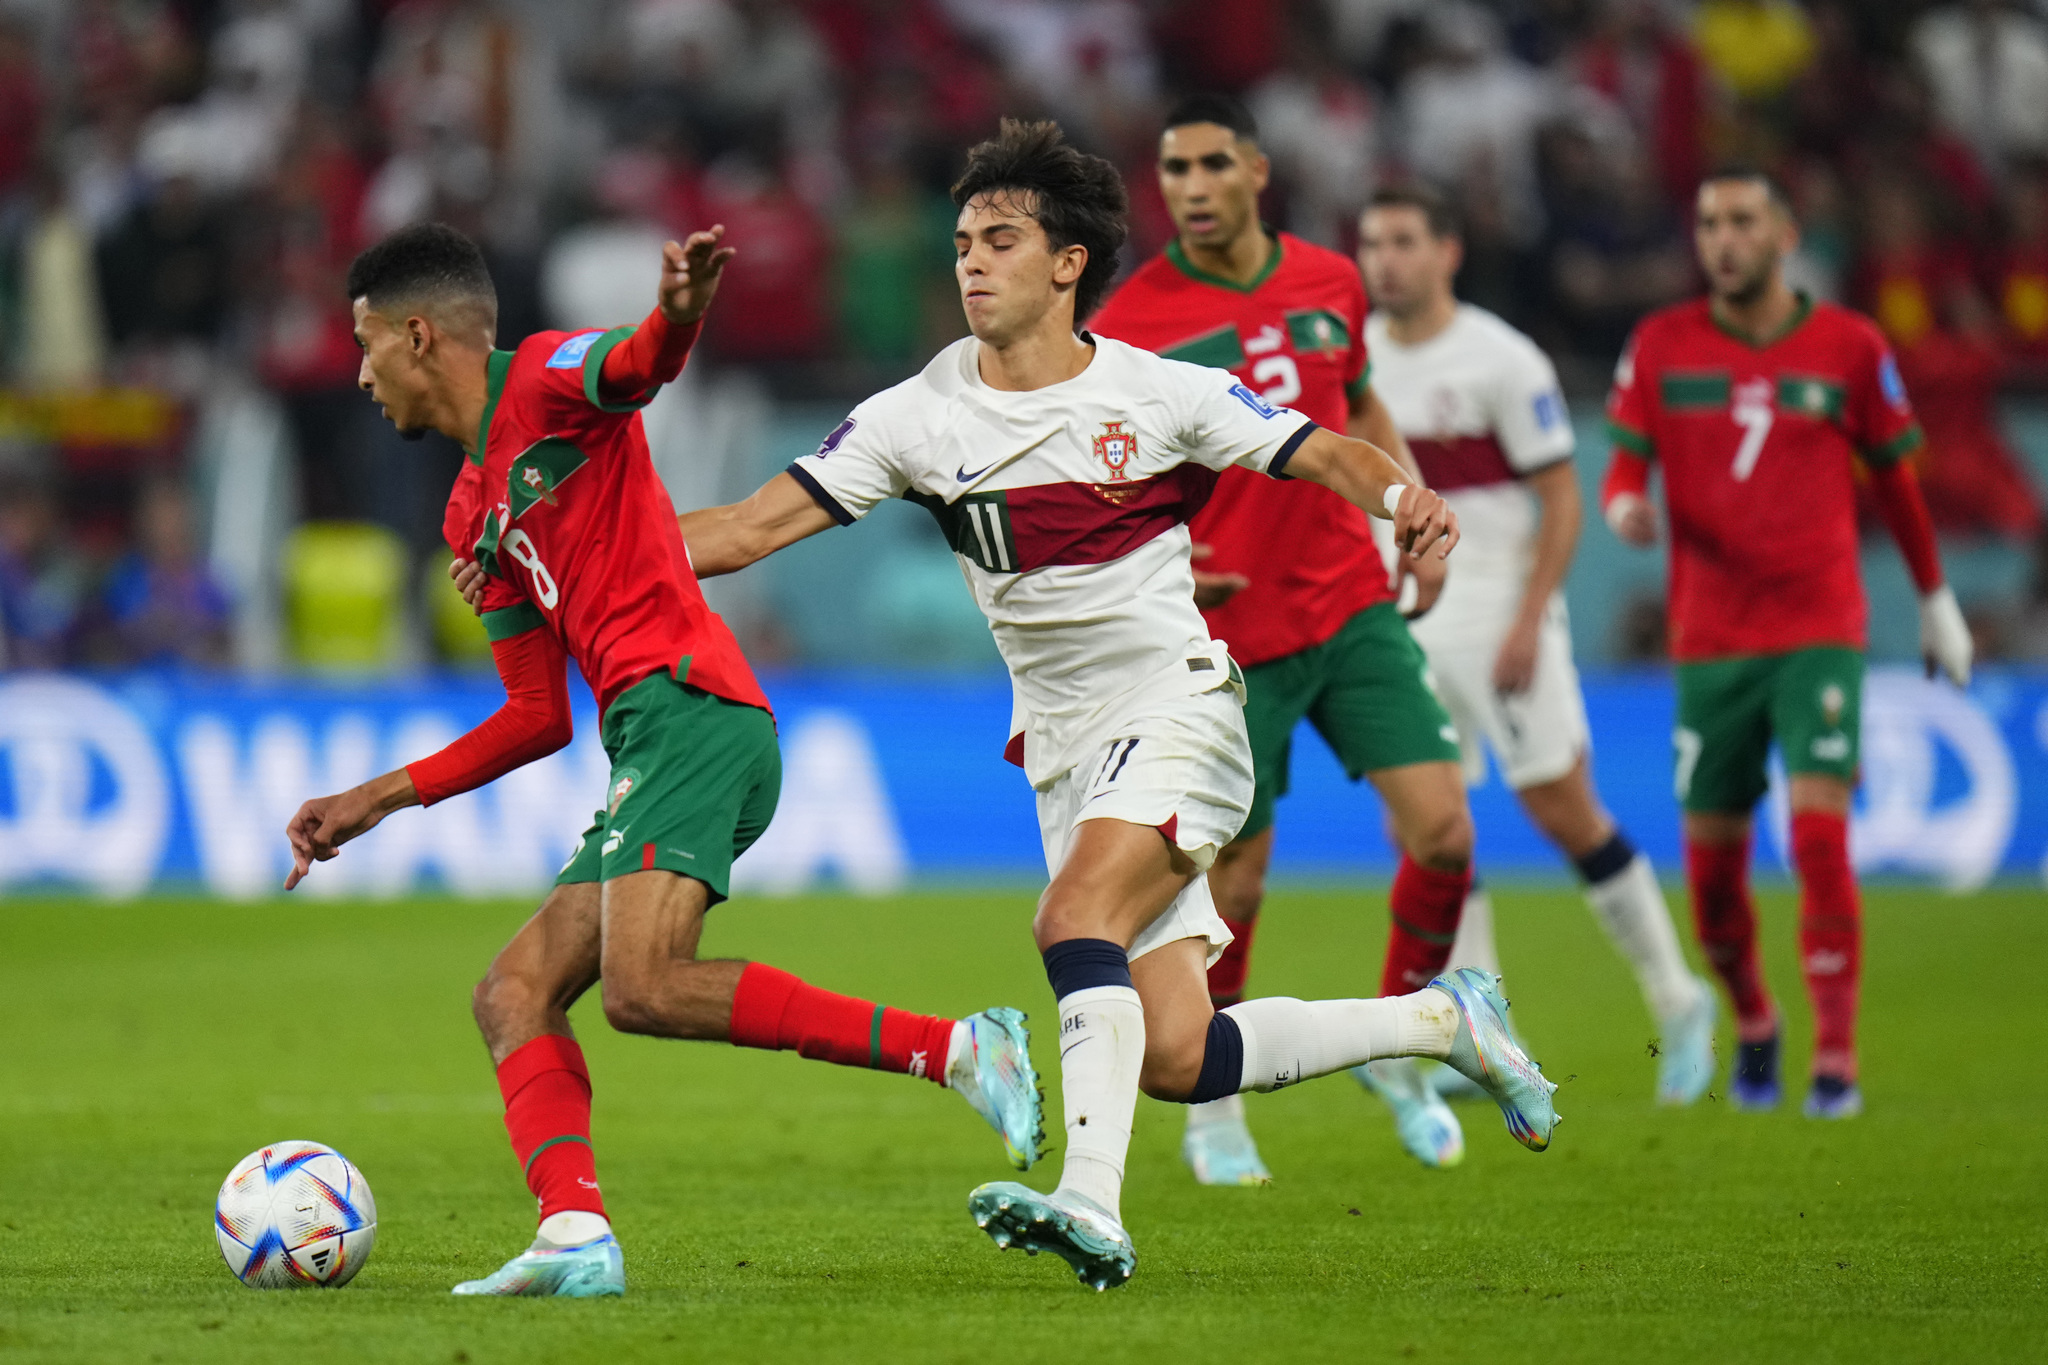 Morocco stunned Cristiano Ronaldo's Portugal in Saturday's World Cup quarter-final tie as Youssef En-Nesyri headed home to seal his country's 1-0 triumph